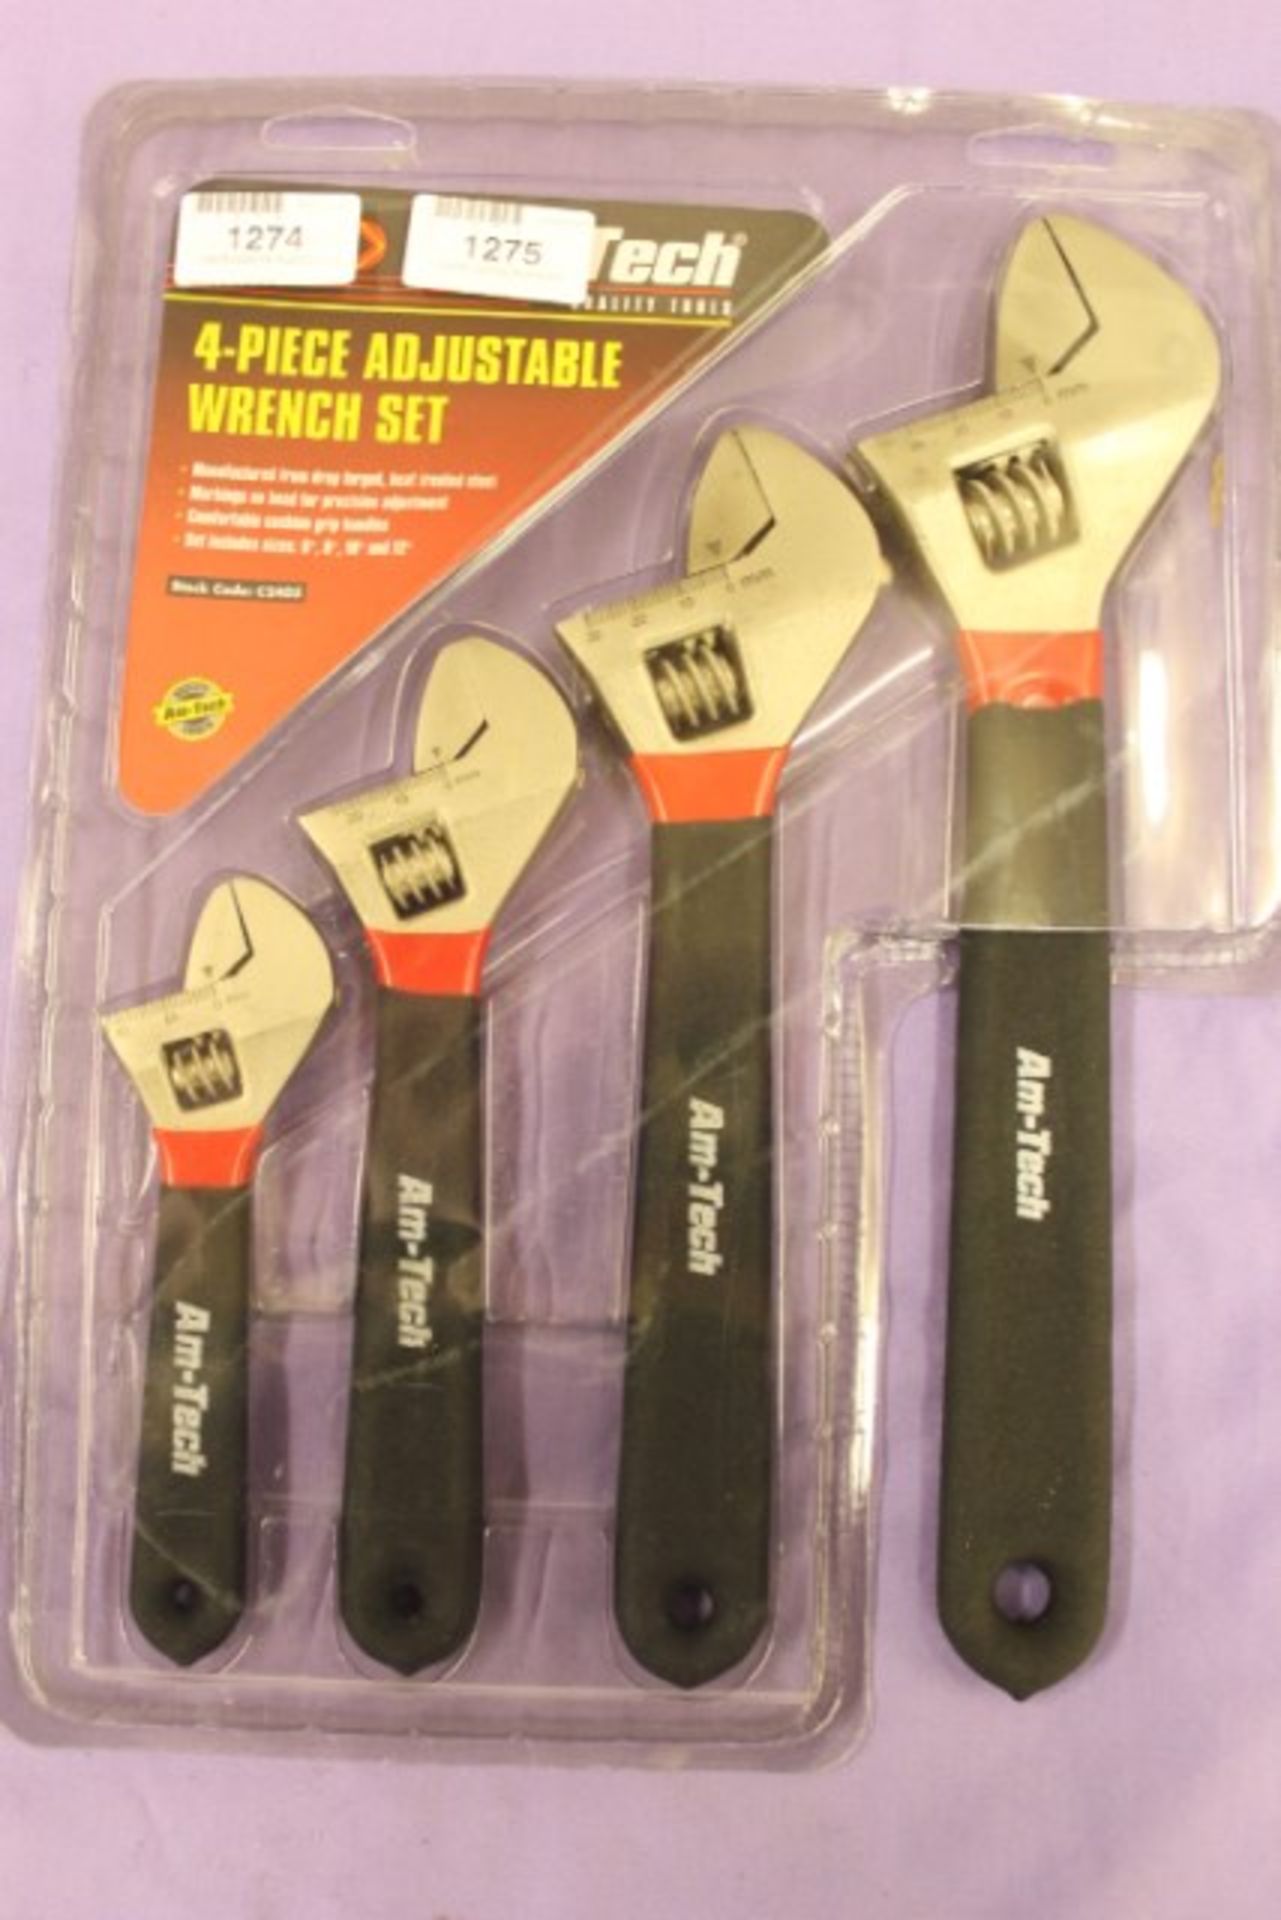 V Brand New Large Four Piece Adjustable Spanner Set Up To 12 Inch X 2 YOUR BID PRICE TO BE - Image 2 of 2